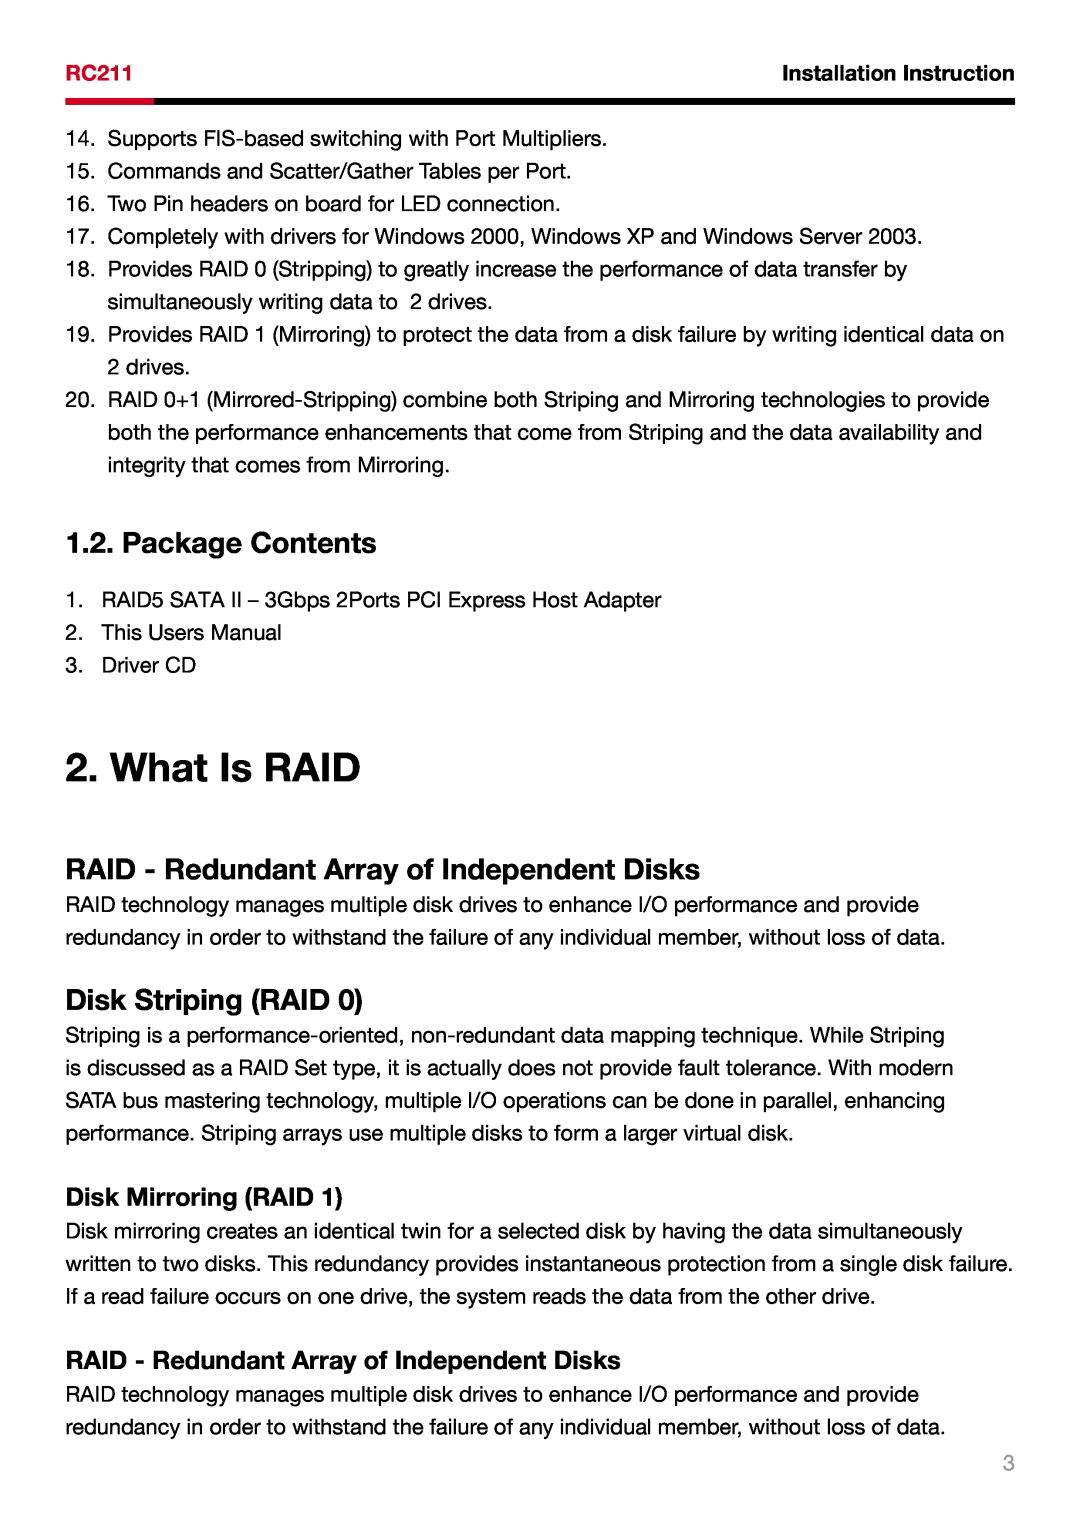 Rosewill RC211 user manual What Is RAID, Package Contents, RAID - Redundant Array of Independent Disks, Disk Striping RAID 